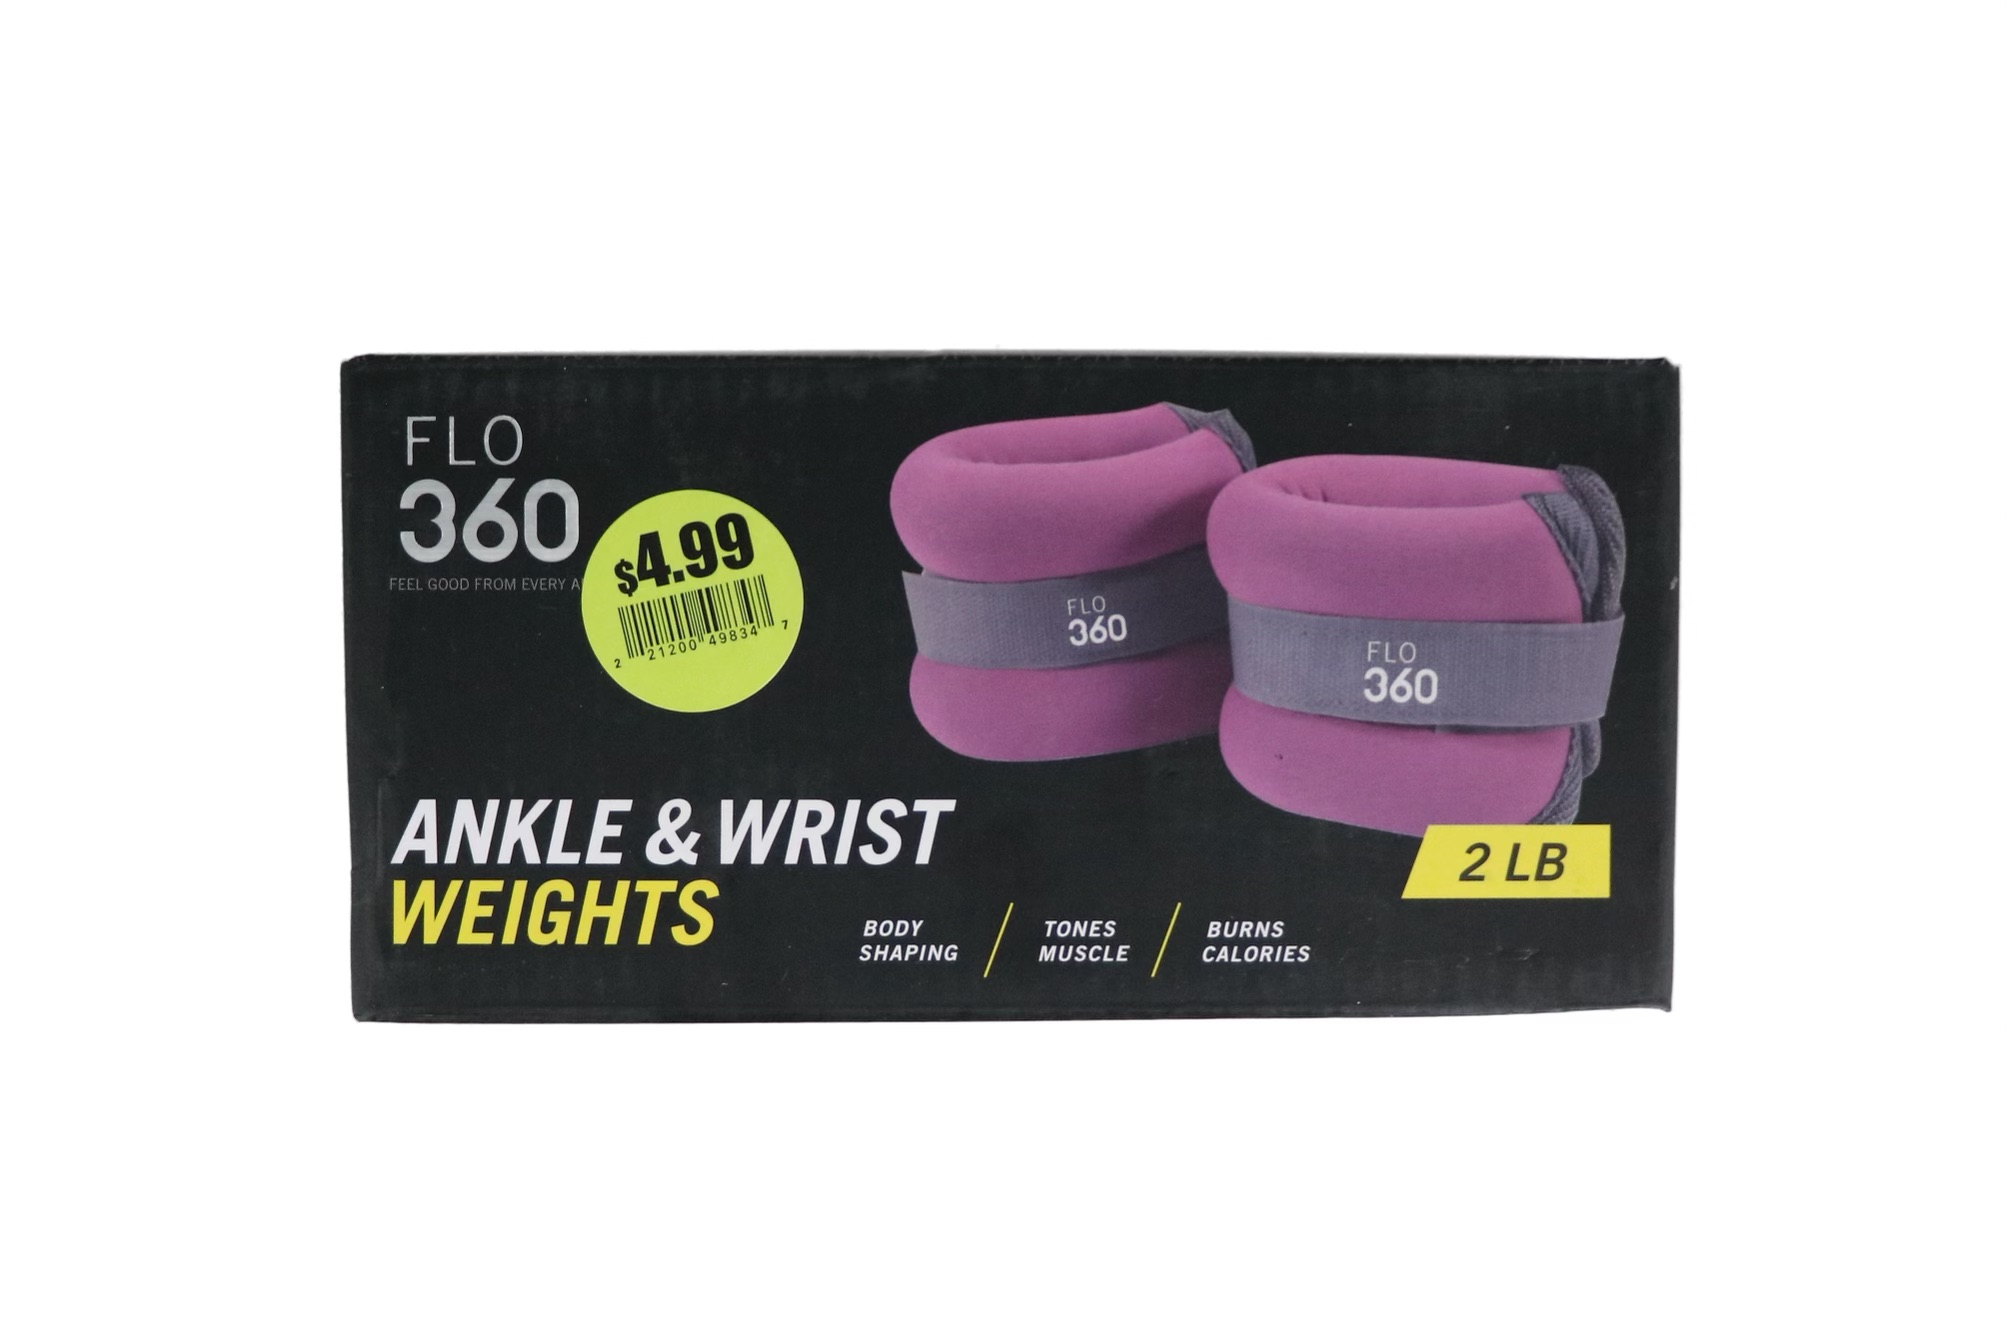 4.99 2 POUND ANKLE WEIGHT